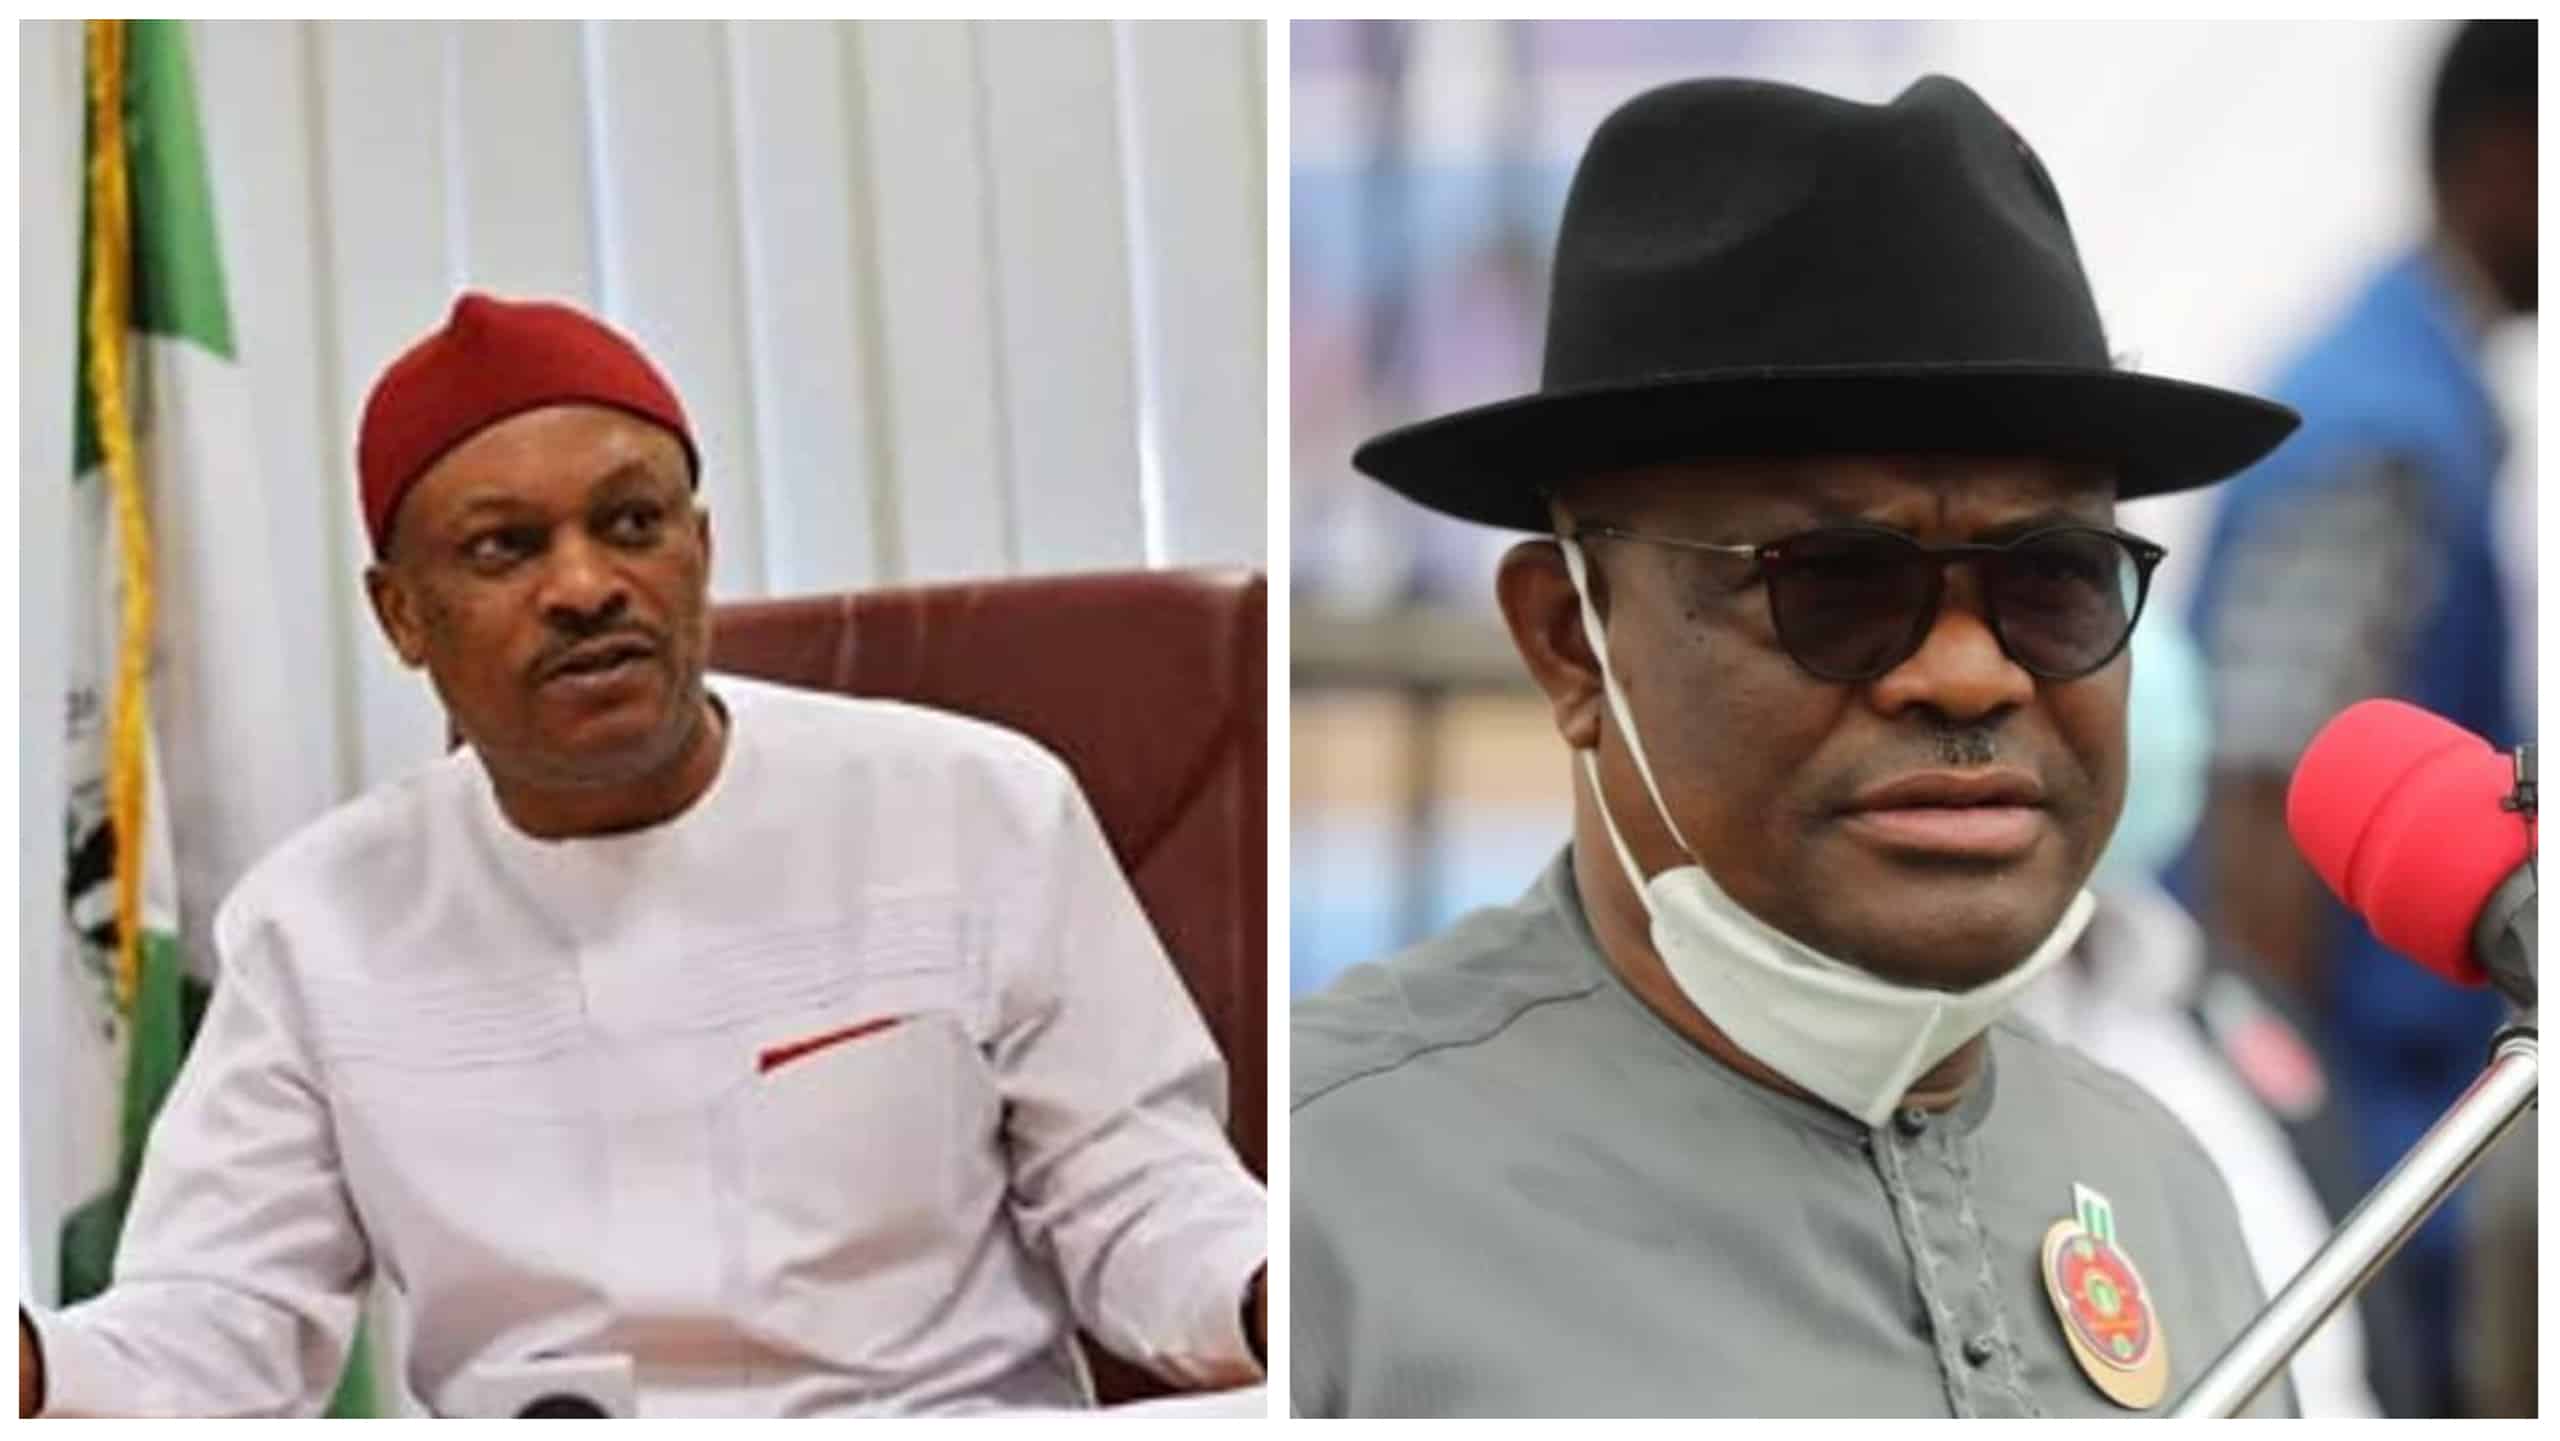 PDP Crisis: Wike Has Right To Express His Grievances - Anyanwu